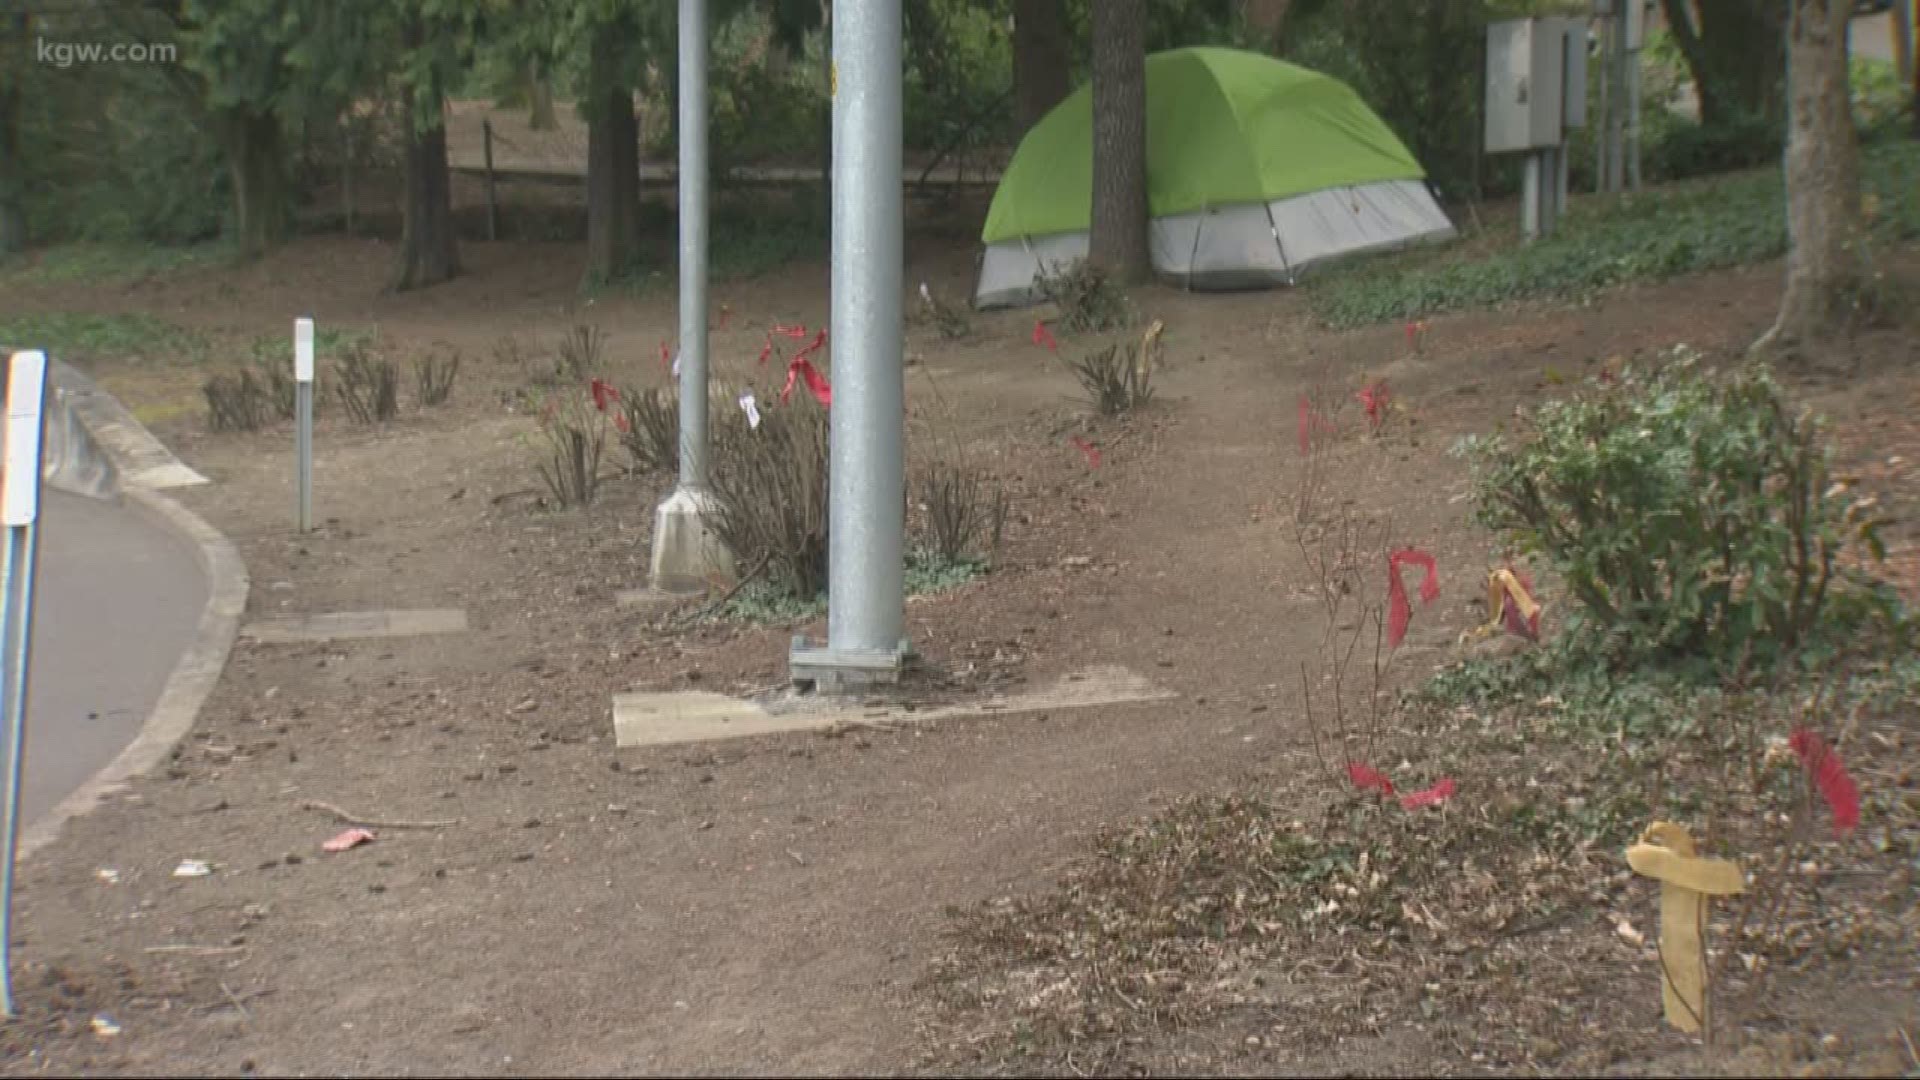 Community members in SW Portland plant roses to deter homeless campers.